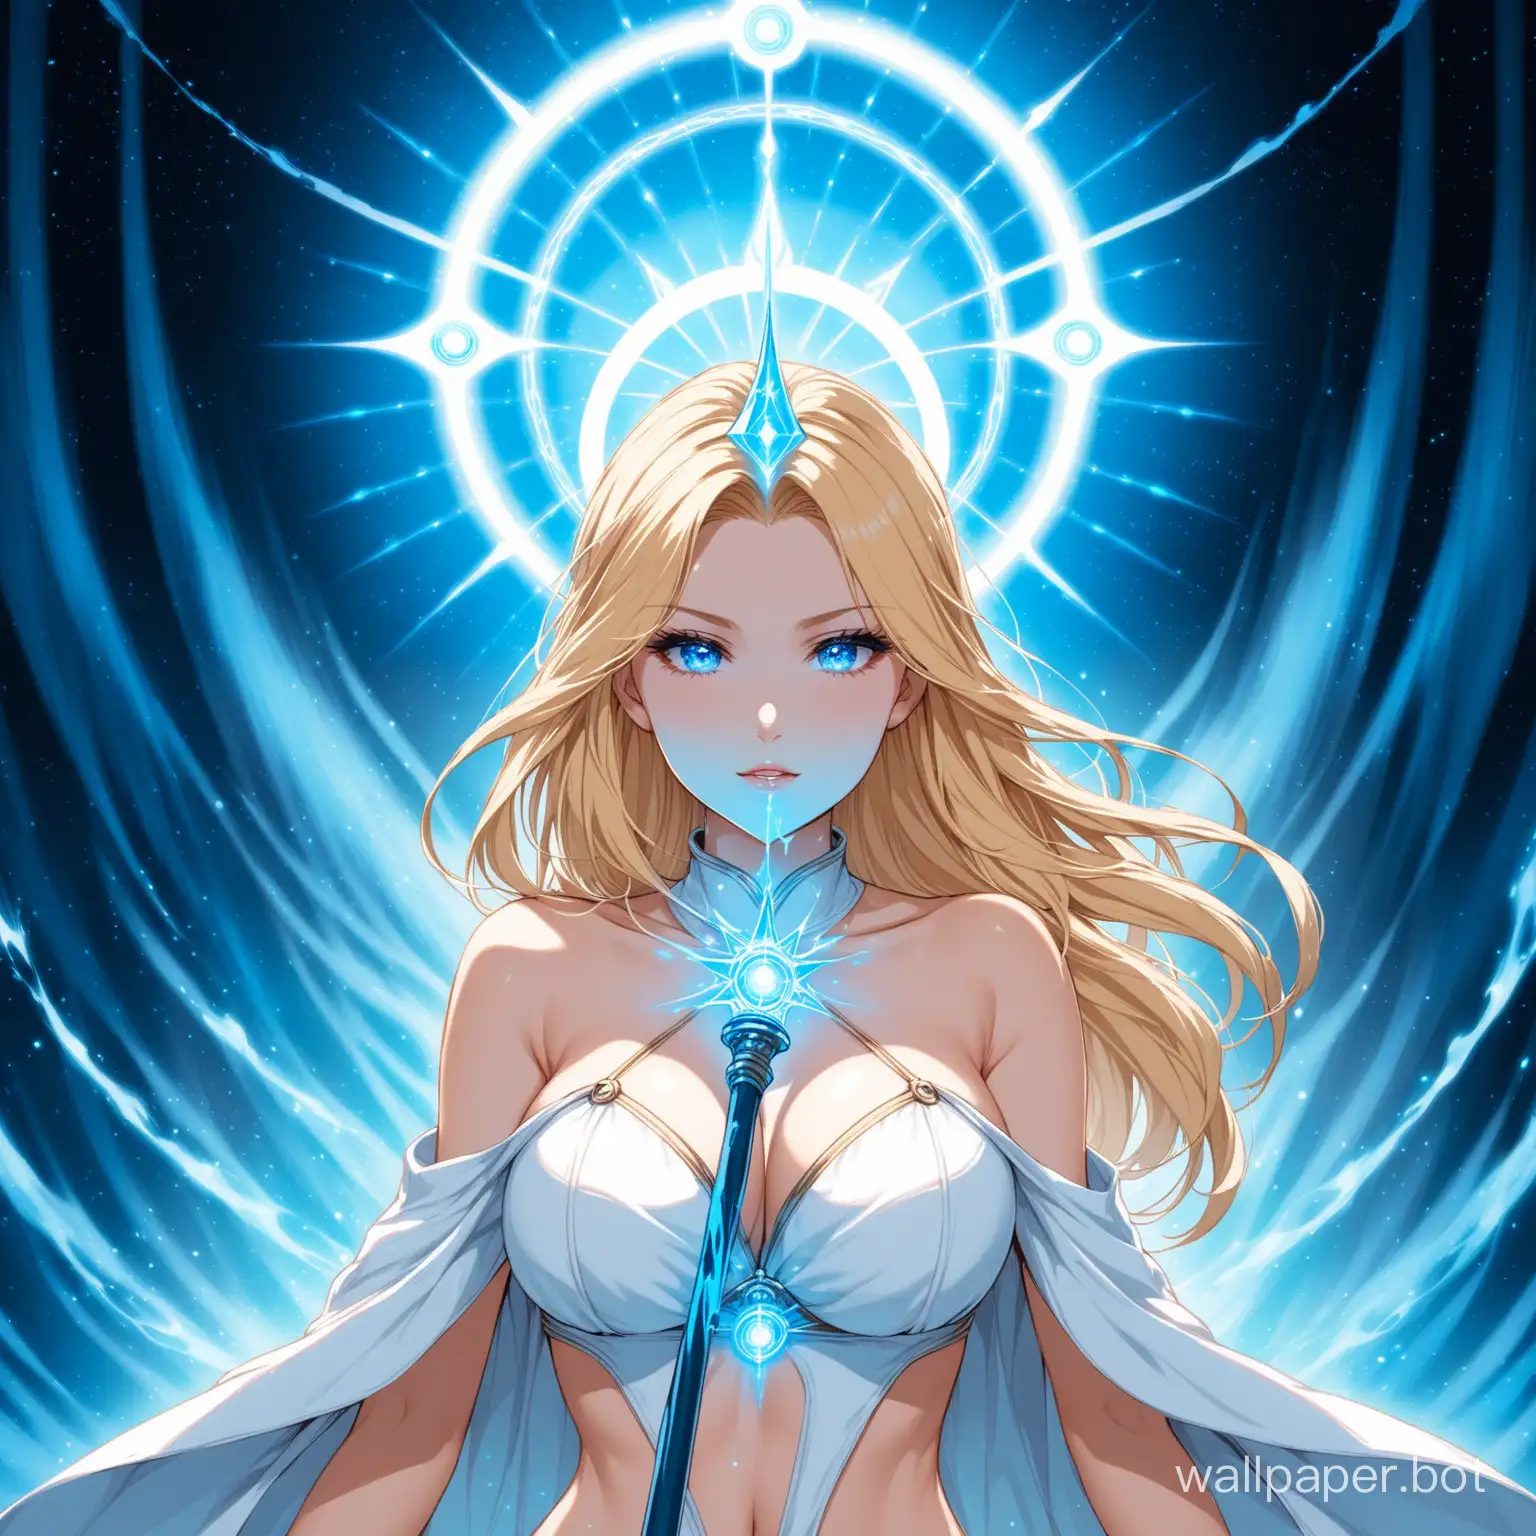 Heavenly-Blonde-Woman-with-Wizard-Staff-and-Blue-Aura